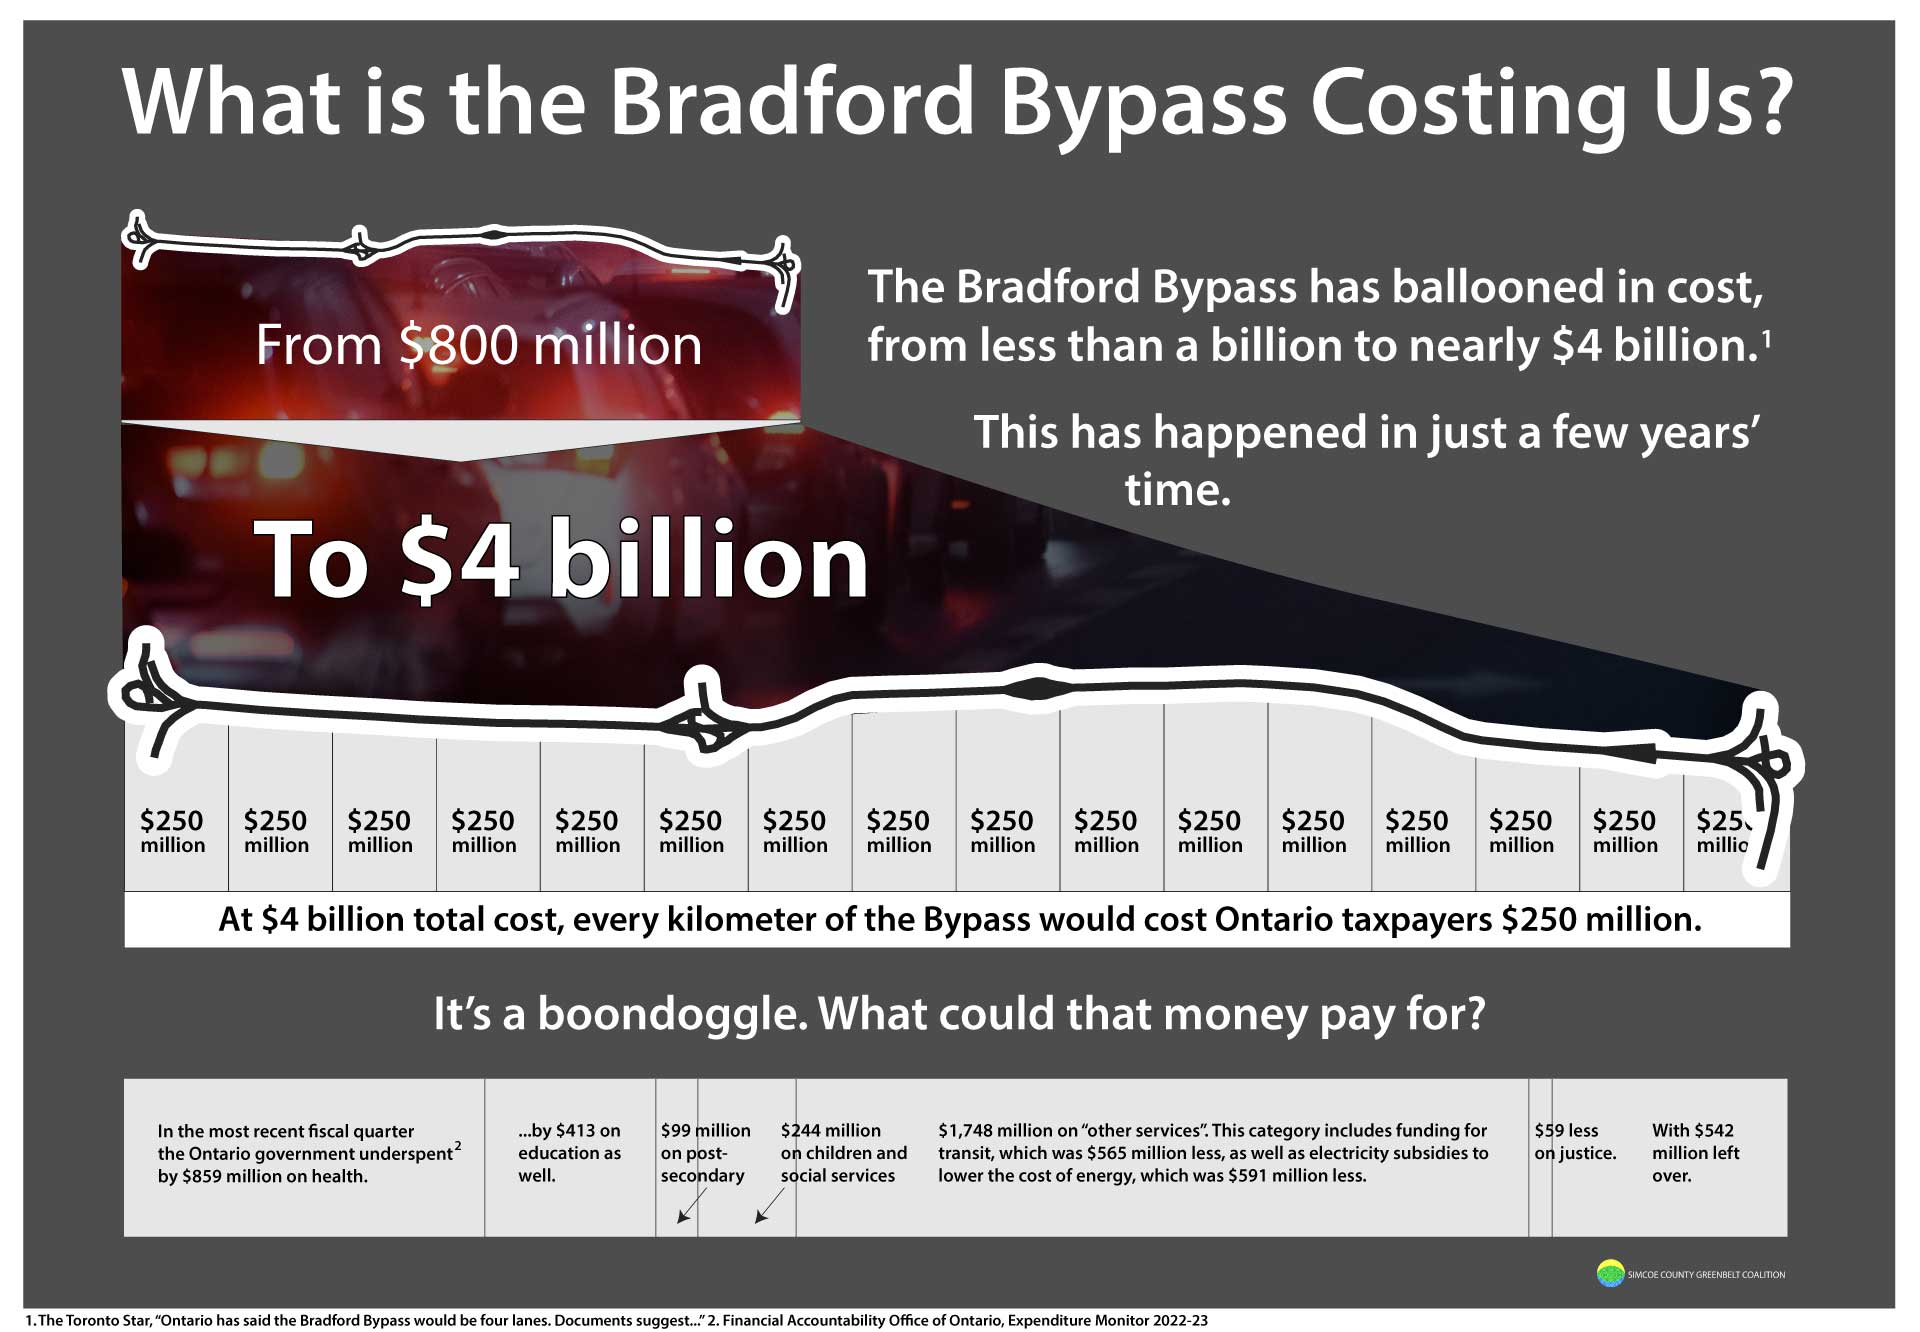 Infographic showing how much the cost of the Bradford Bypass has ballooned, and what that money could be spent on instead. Credit Simcoe County Greenbelt Coalition.